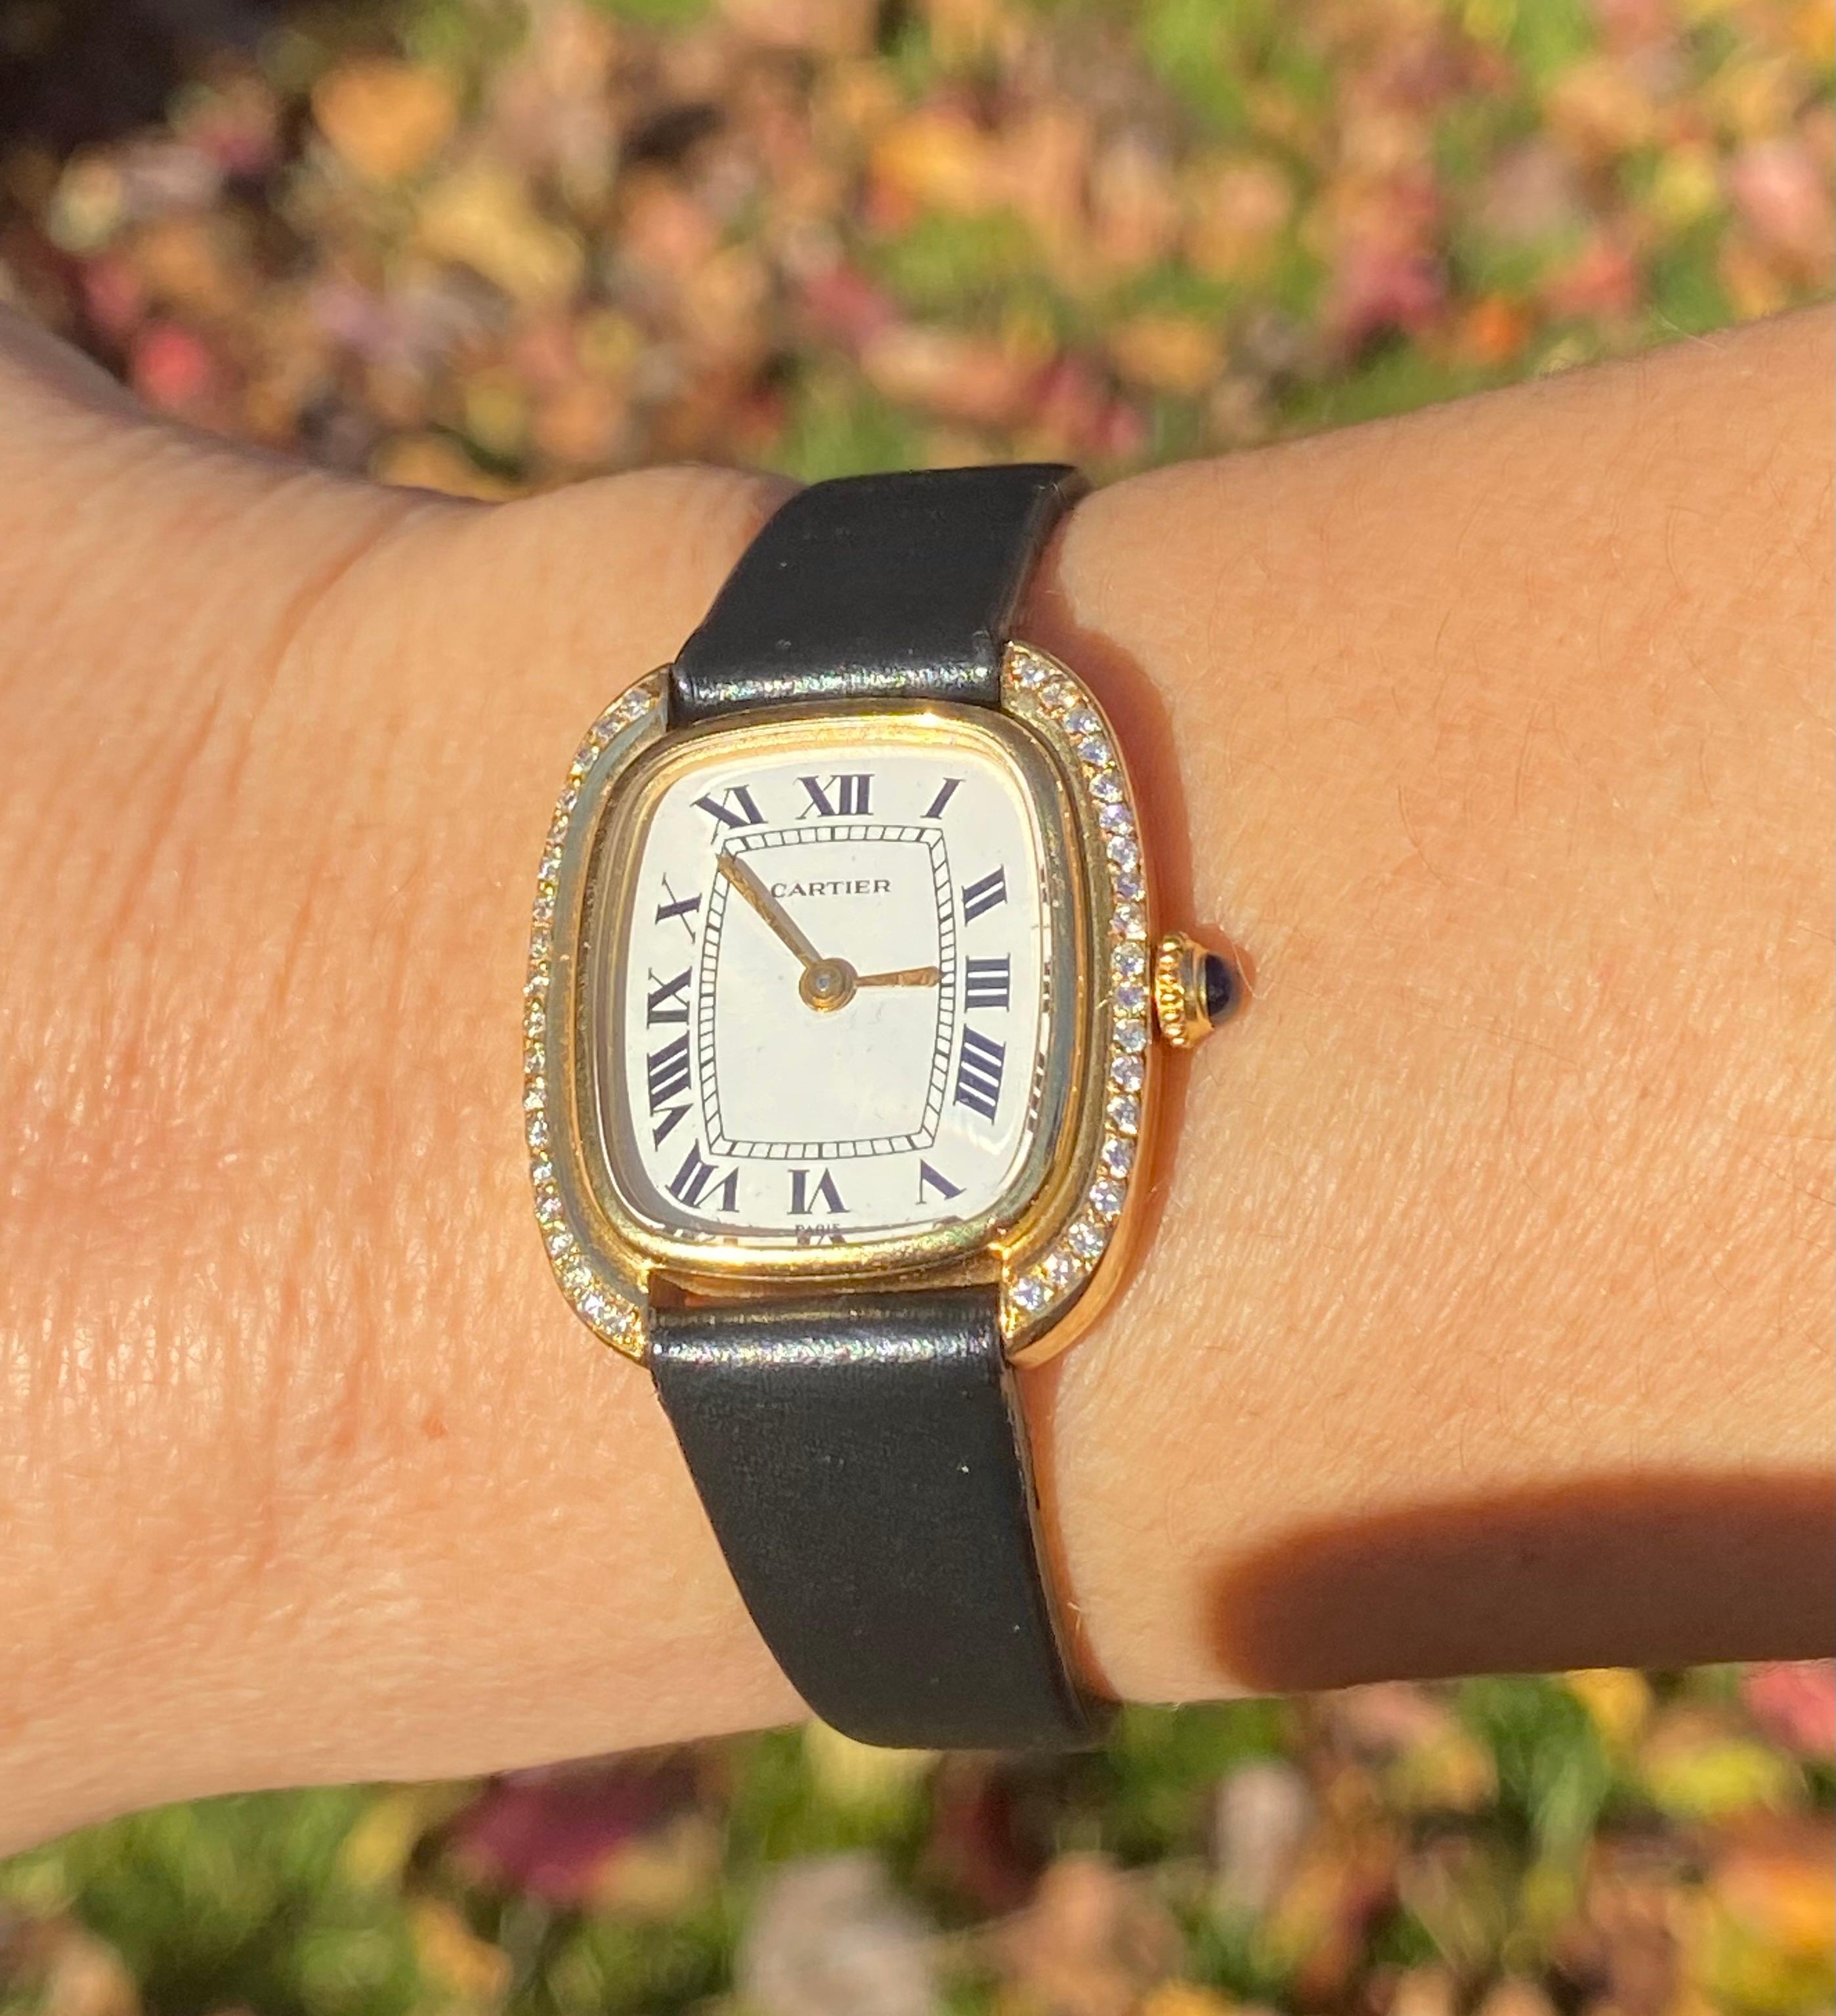 Ladies Vintage Cartier Gondole Watch with Diamond Bezel in Leather Strap For Sale 1